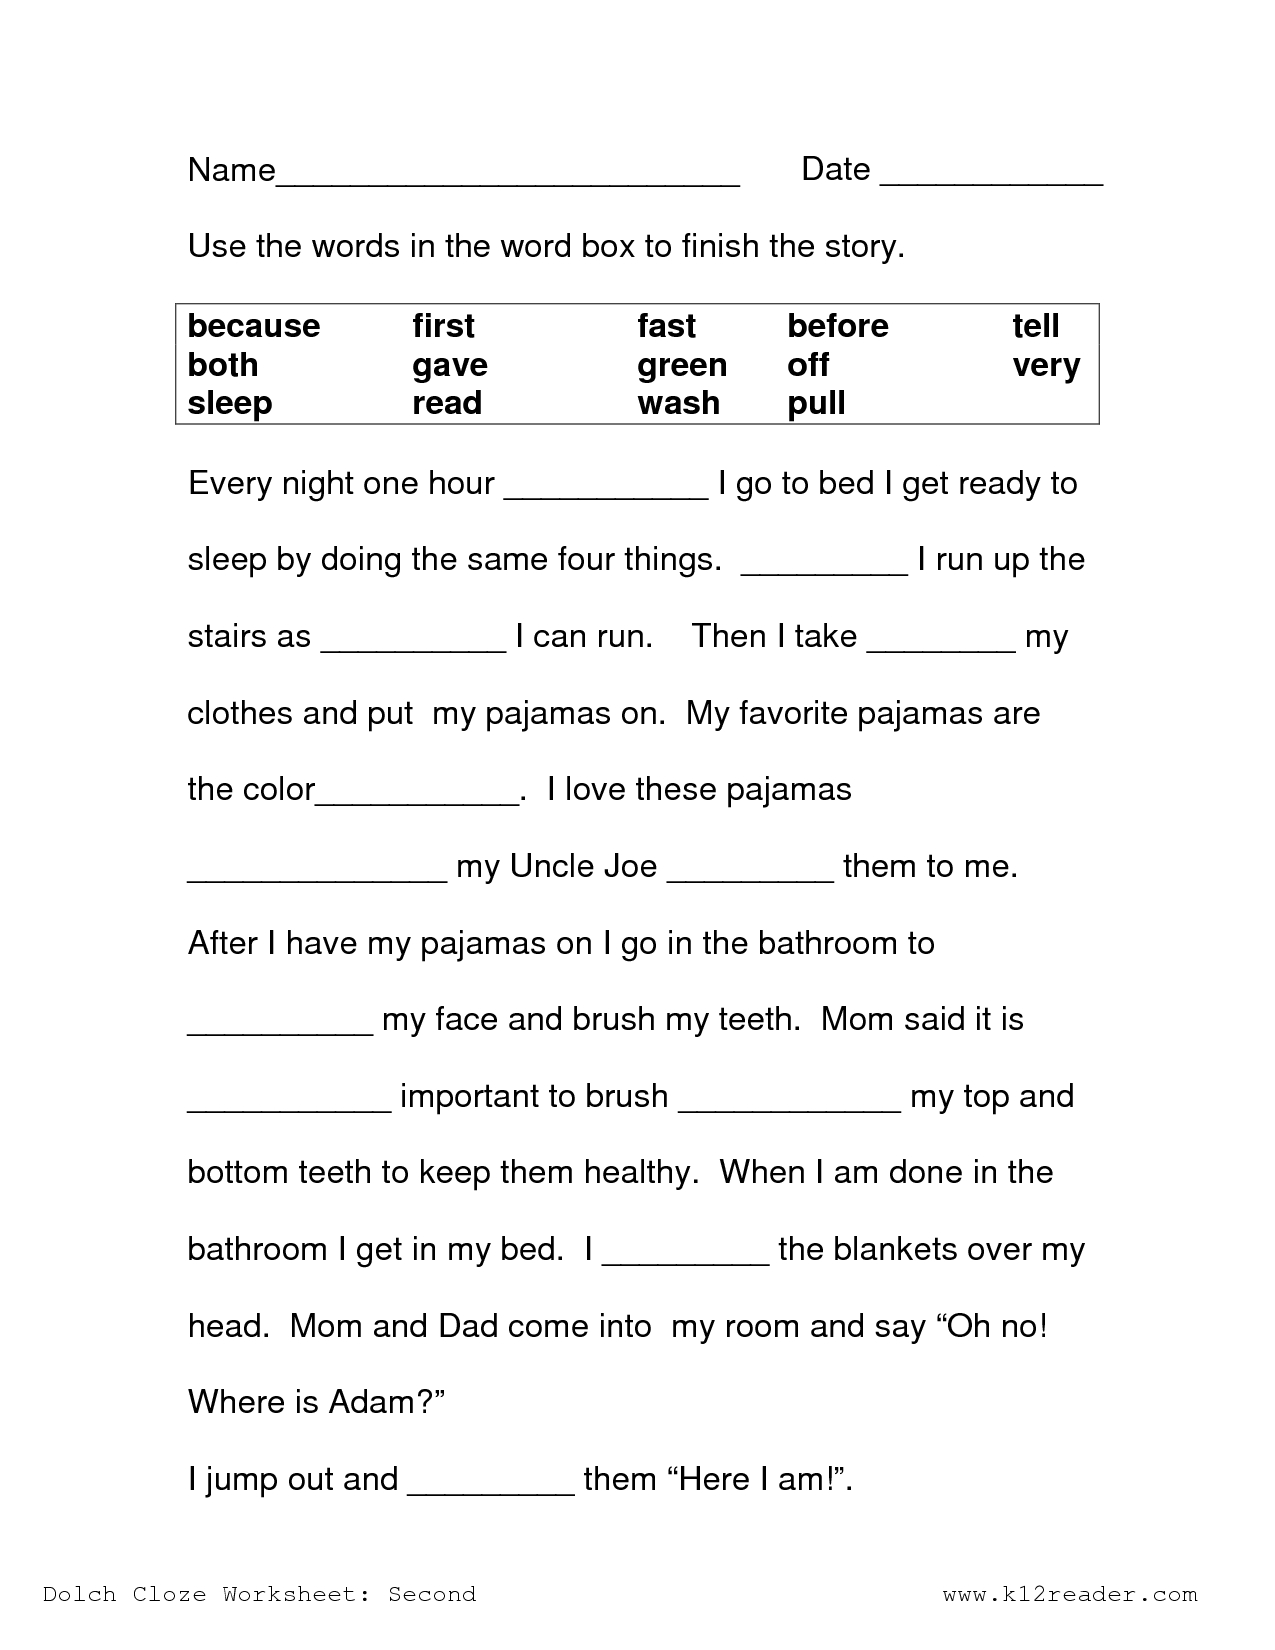 Image Result For Free Cloze Reading Passages 2Nd Grade | Printables - Free Printable Short Stories For 2Nd Graders